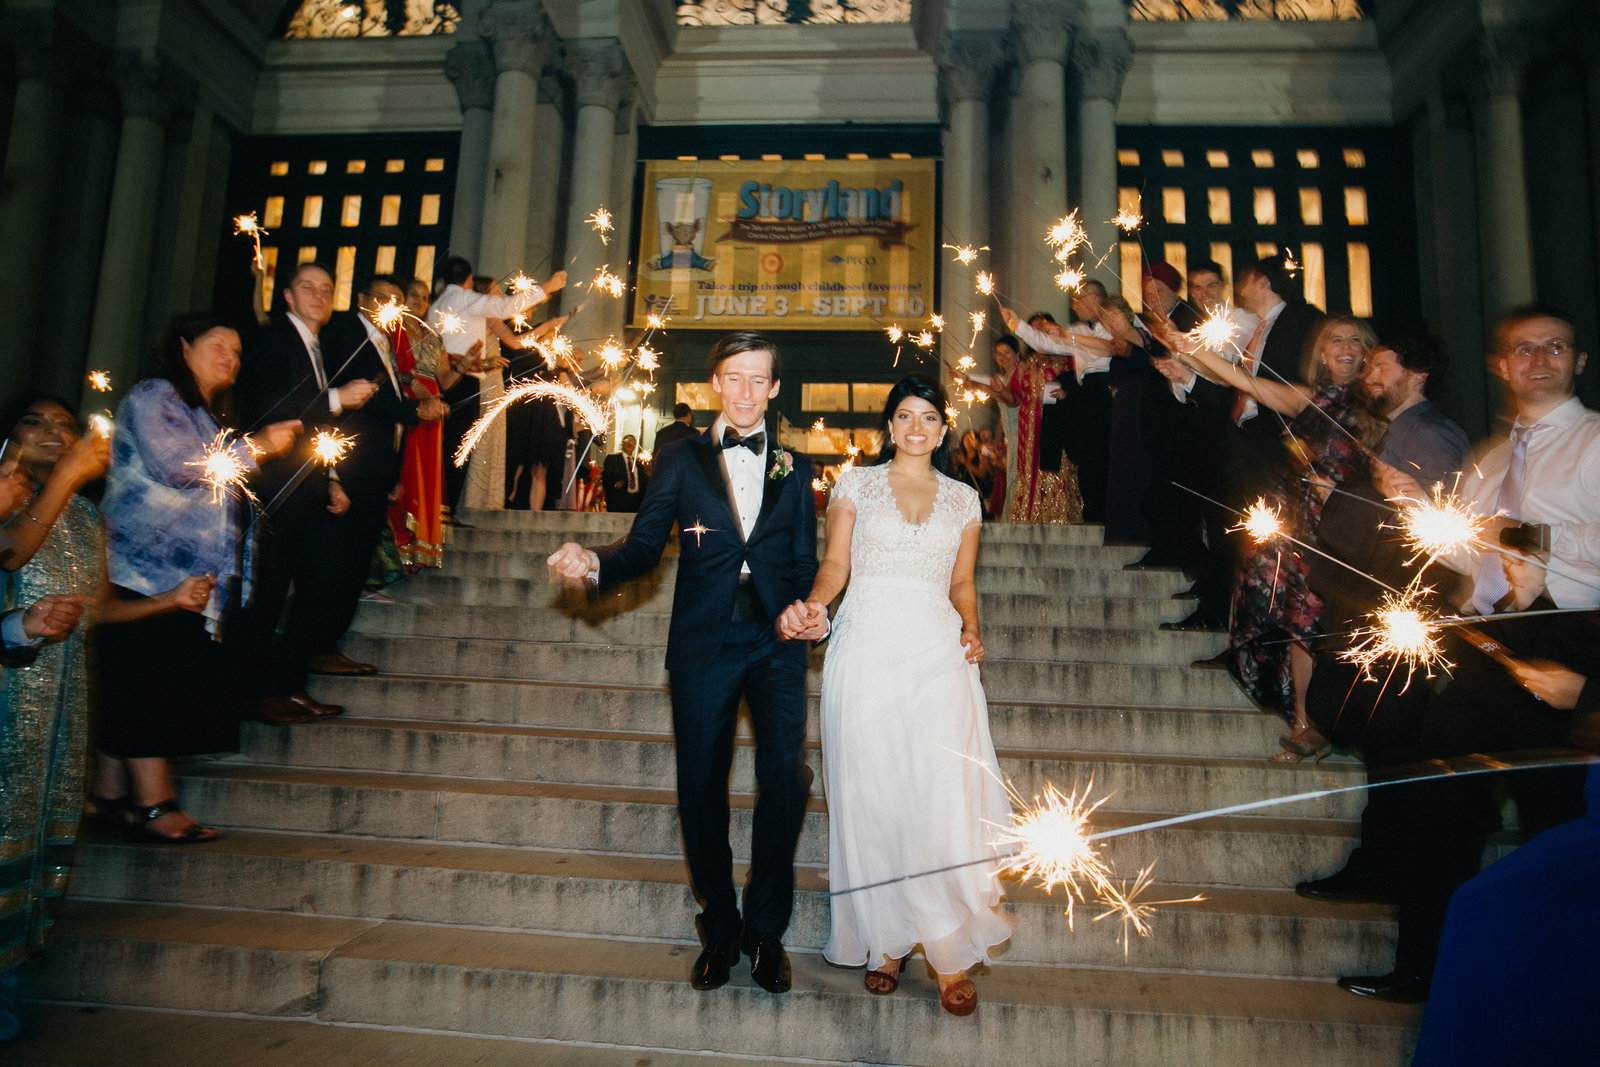 A sparkler exit to end the night at this elegant Philadelphia museum wedding, was the perfect ending to this wedding.